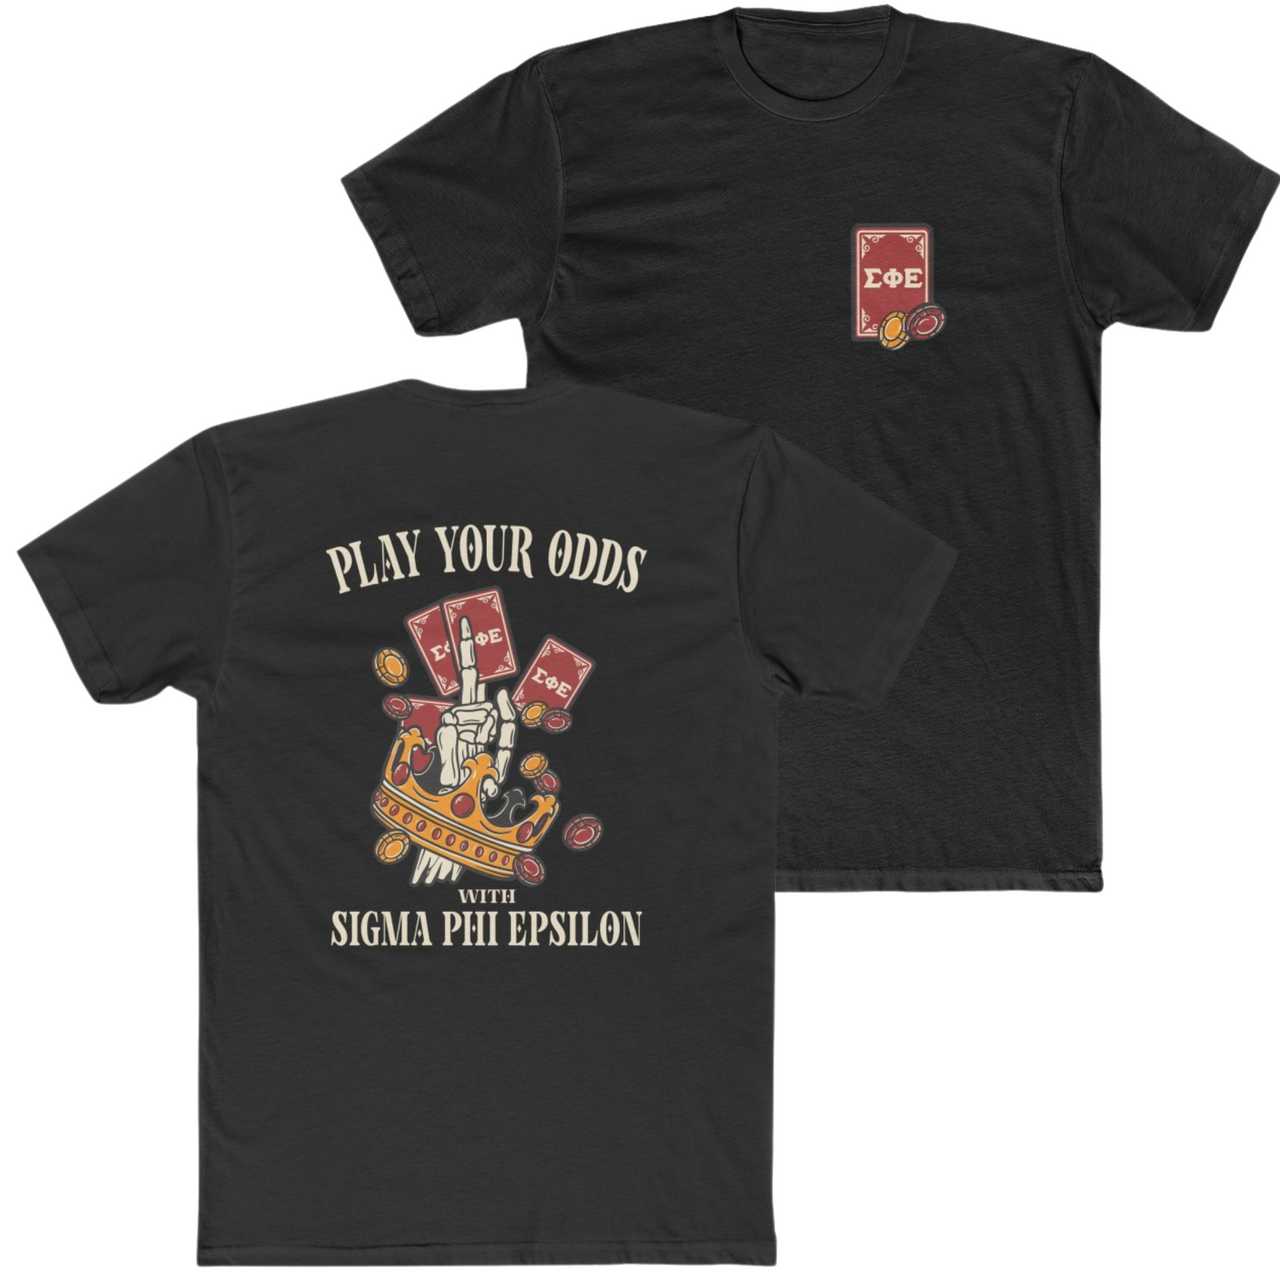 Black Sigma Phi Epsilon Graphic T-Shirt | Play Your Odds | SigEp Clothing - Campus Apparel